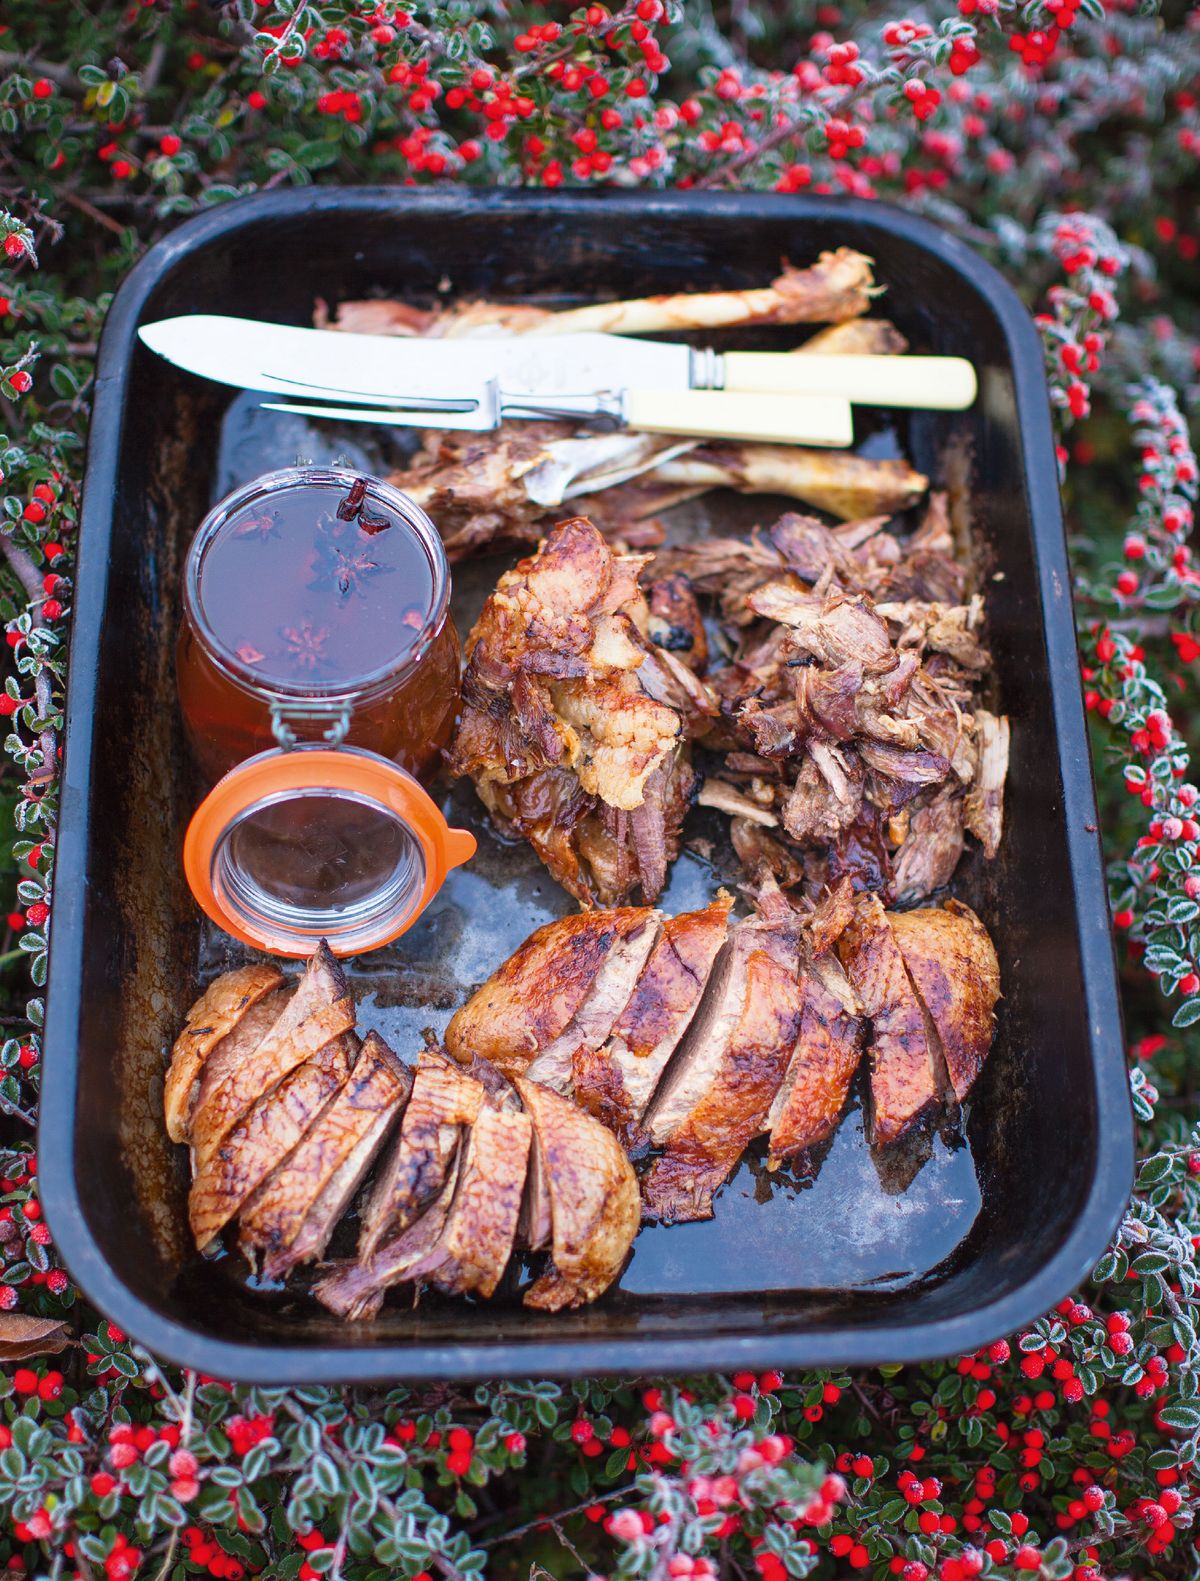 Jamie Oliver’s Roast Goose Slow-Cooked with Christmas Spices